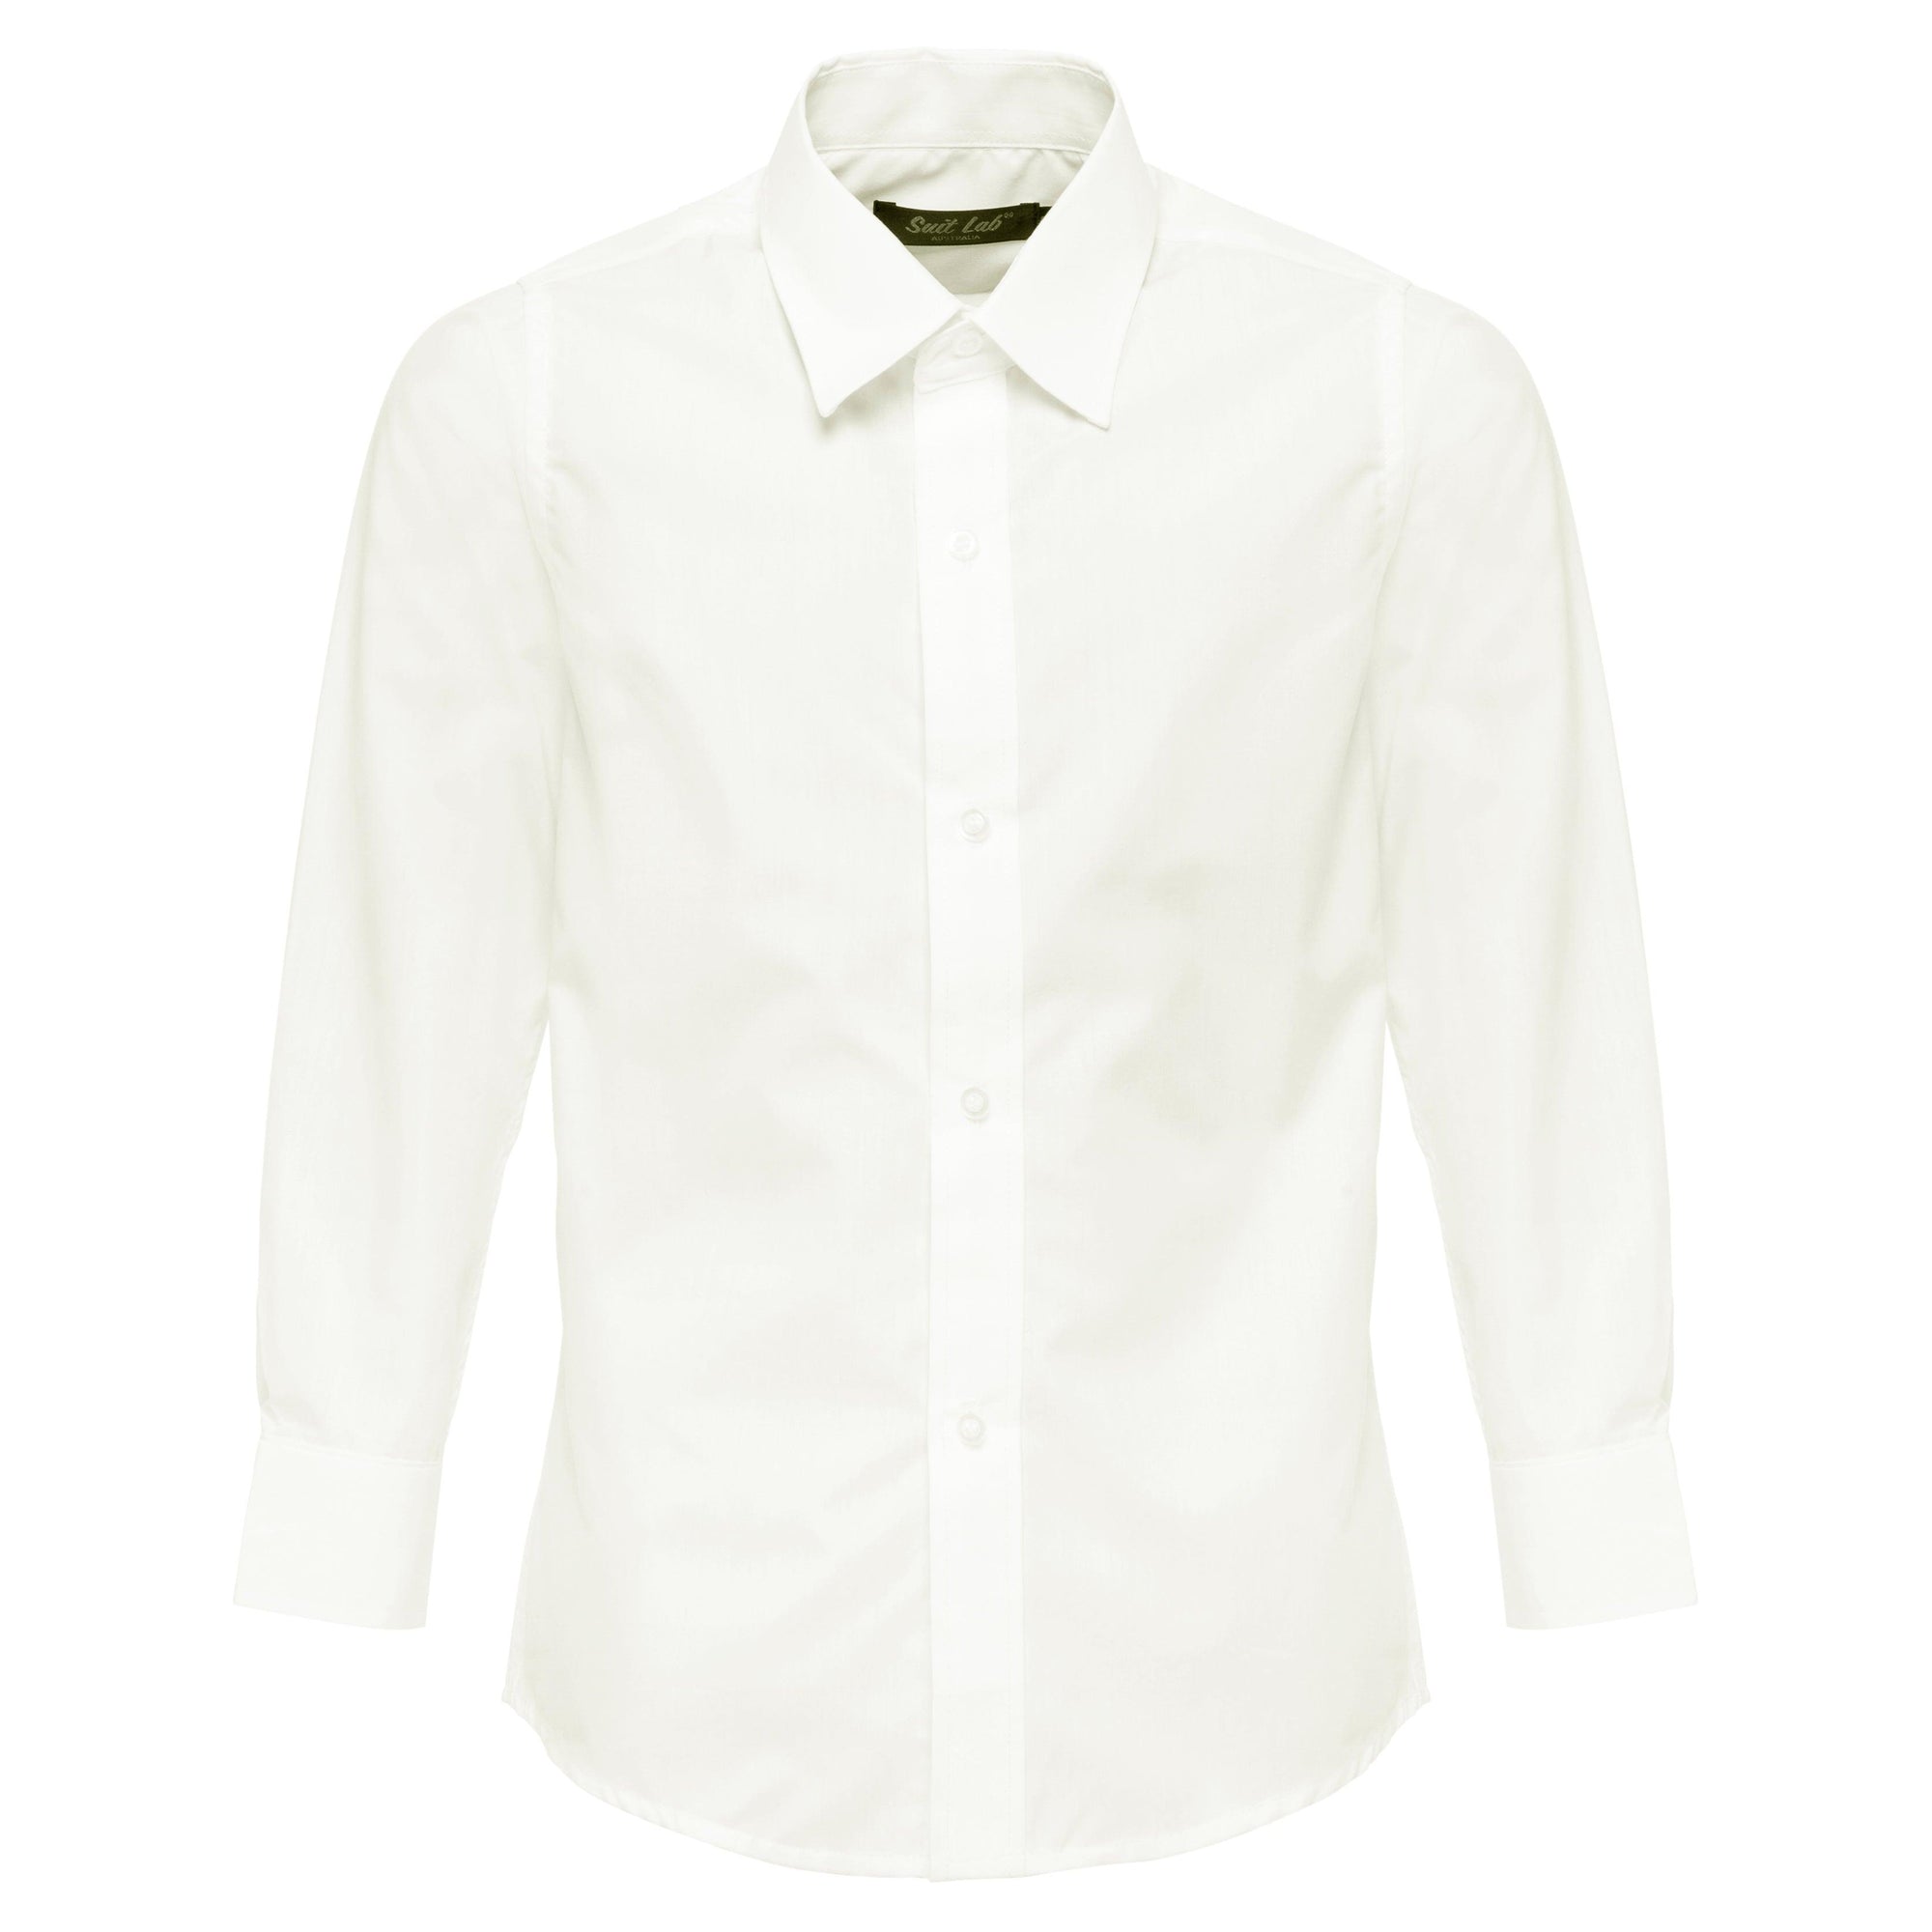 Boys Off-White Formal Shirt - Suit Lab